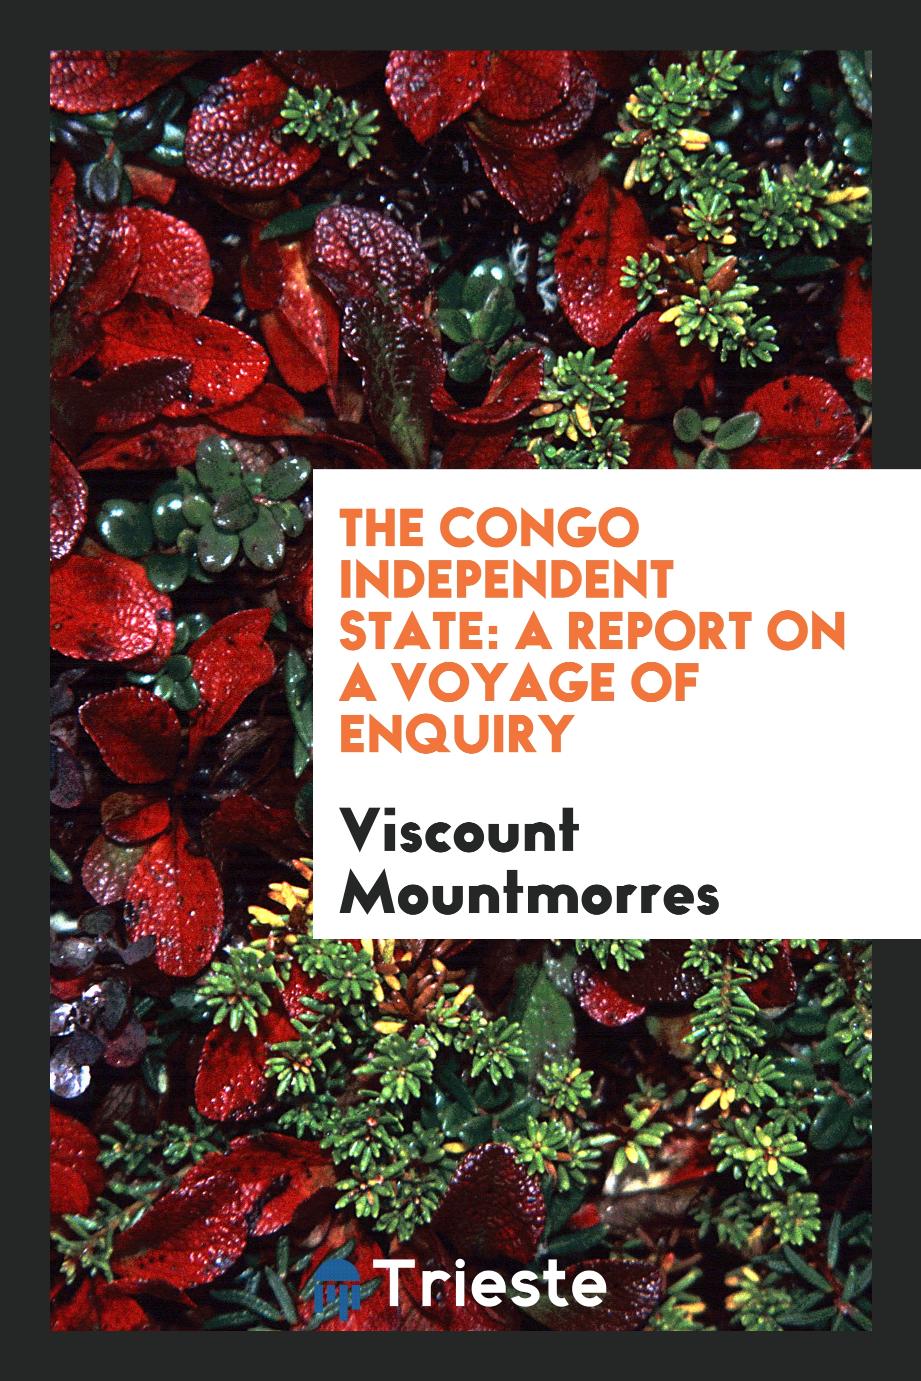 The Congo independent state: a report on a voyage of enquiry